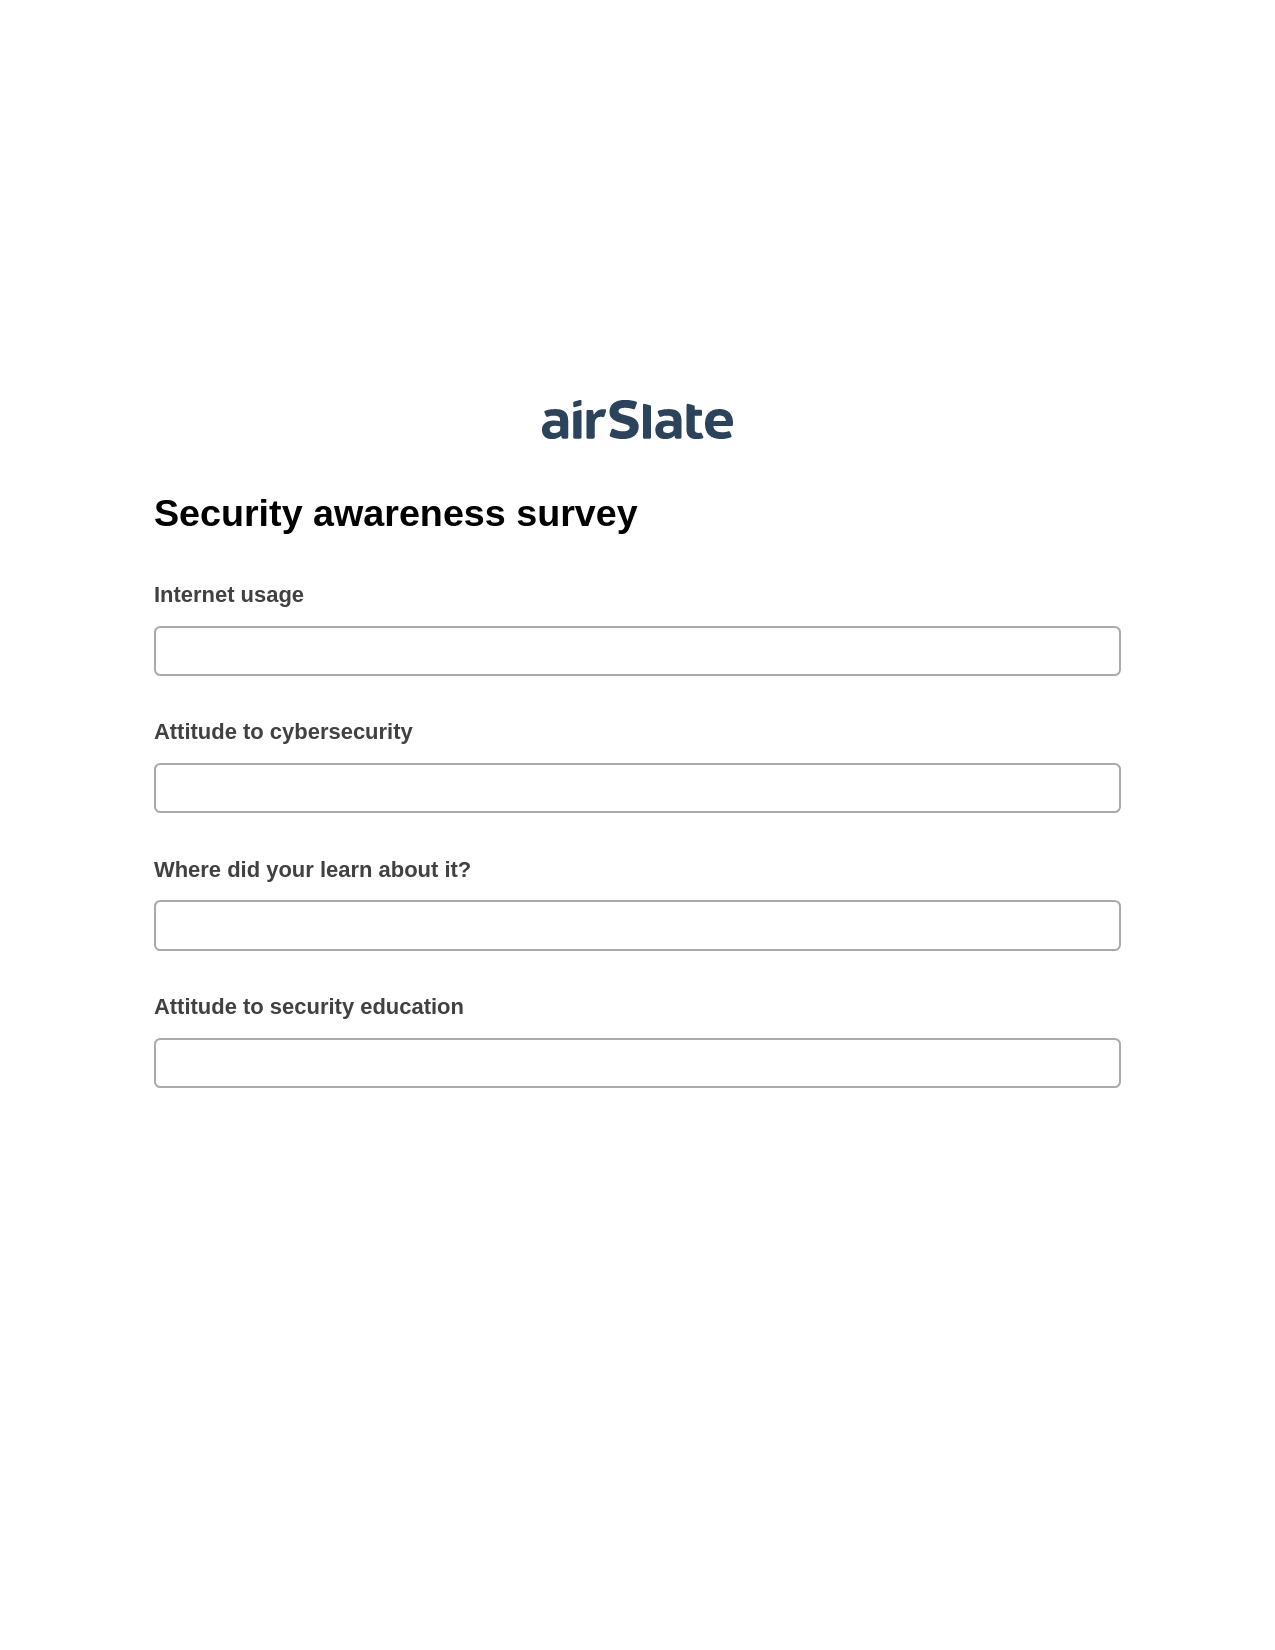 Security awareness survey Pre-fill from Salesforce Record Bot, Email Notification Bot, Export to Salesforce Bot